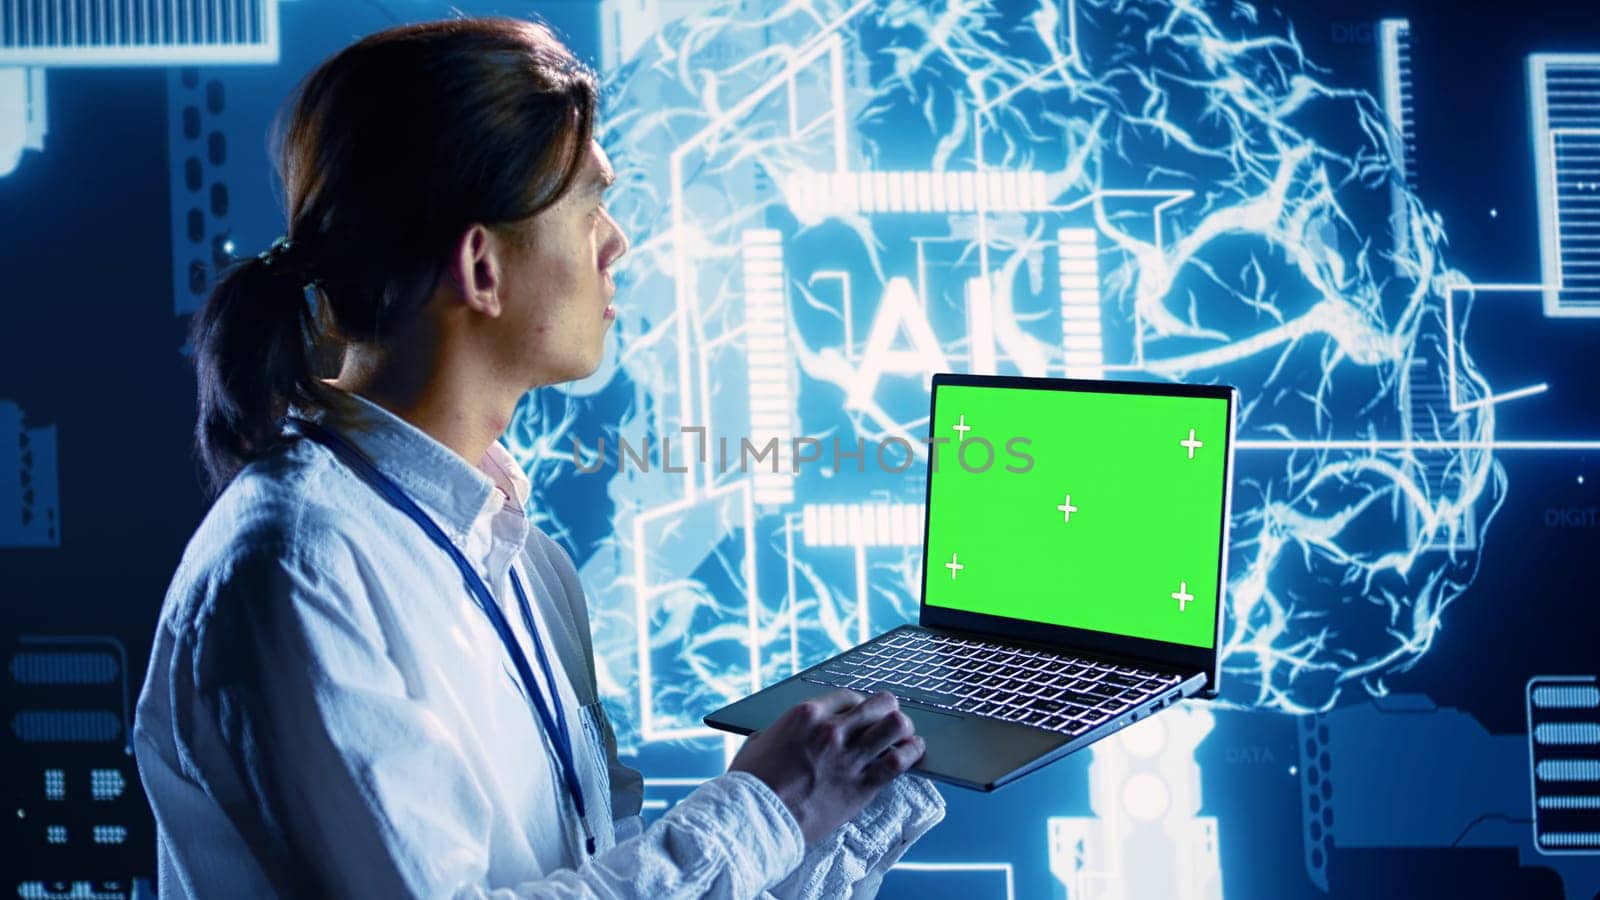 Engineer using mockup laptop to implement artificial intelligence parallel processing. Qualified administrator works on green screen device, enabling AI systems to process machine learning data